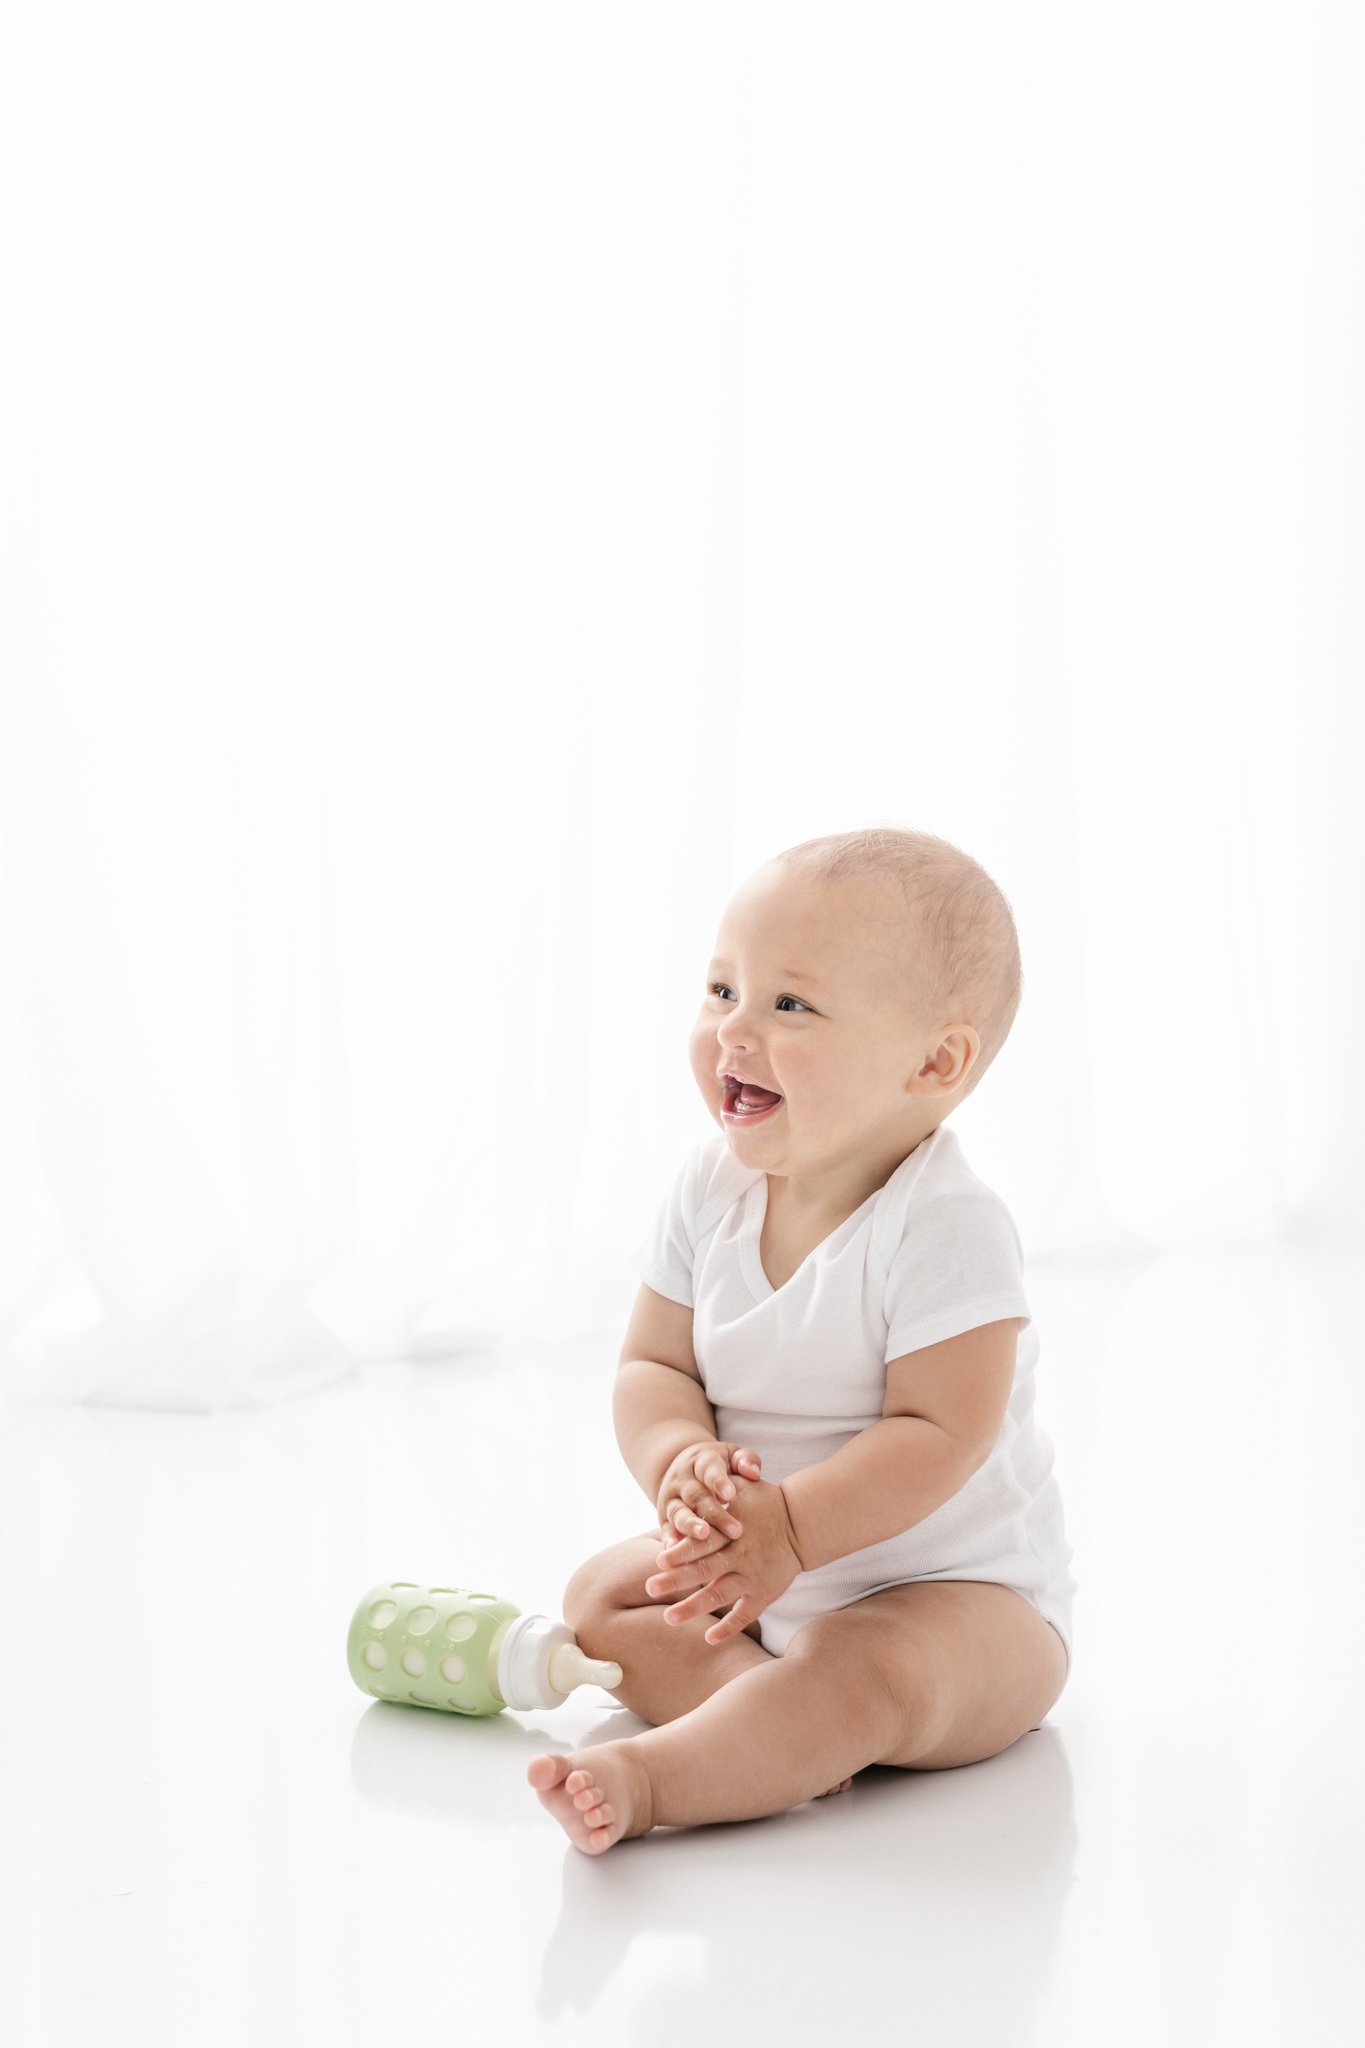  A baby laughs at her mother with a bottle sitting beside her by NJ studio photographer Nicole Hawkins Photography. studio photography New Jersey #NicoleHawkinsPhotography #NicoleHawkinsNewborns #studionewborns #studioportraits #babystudioportraits #